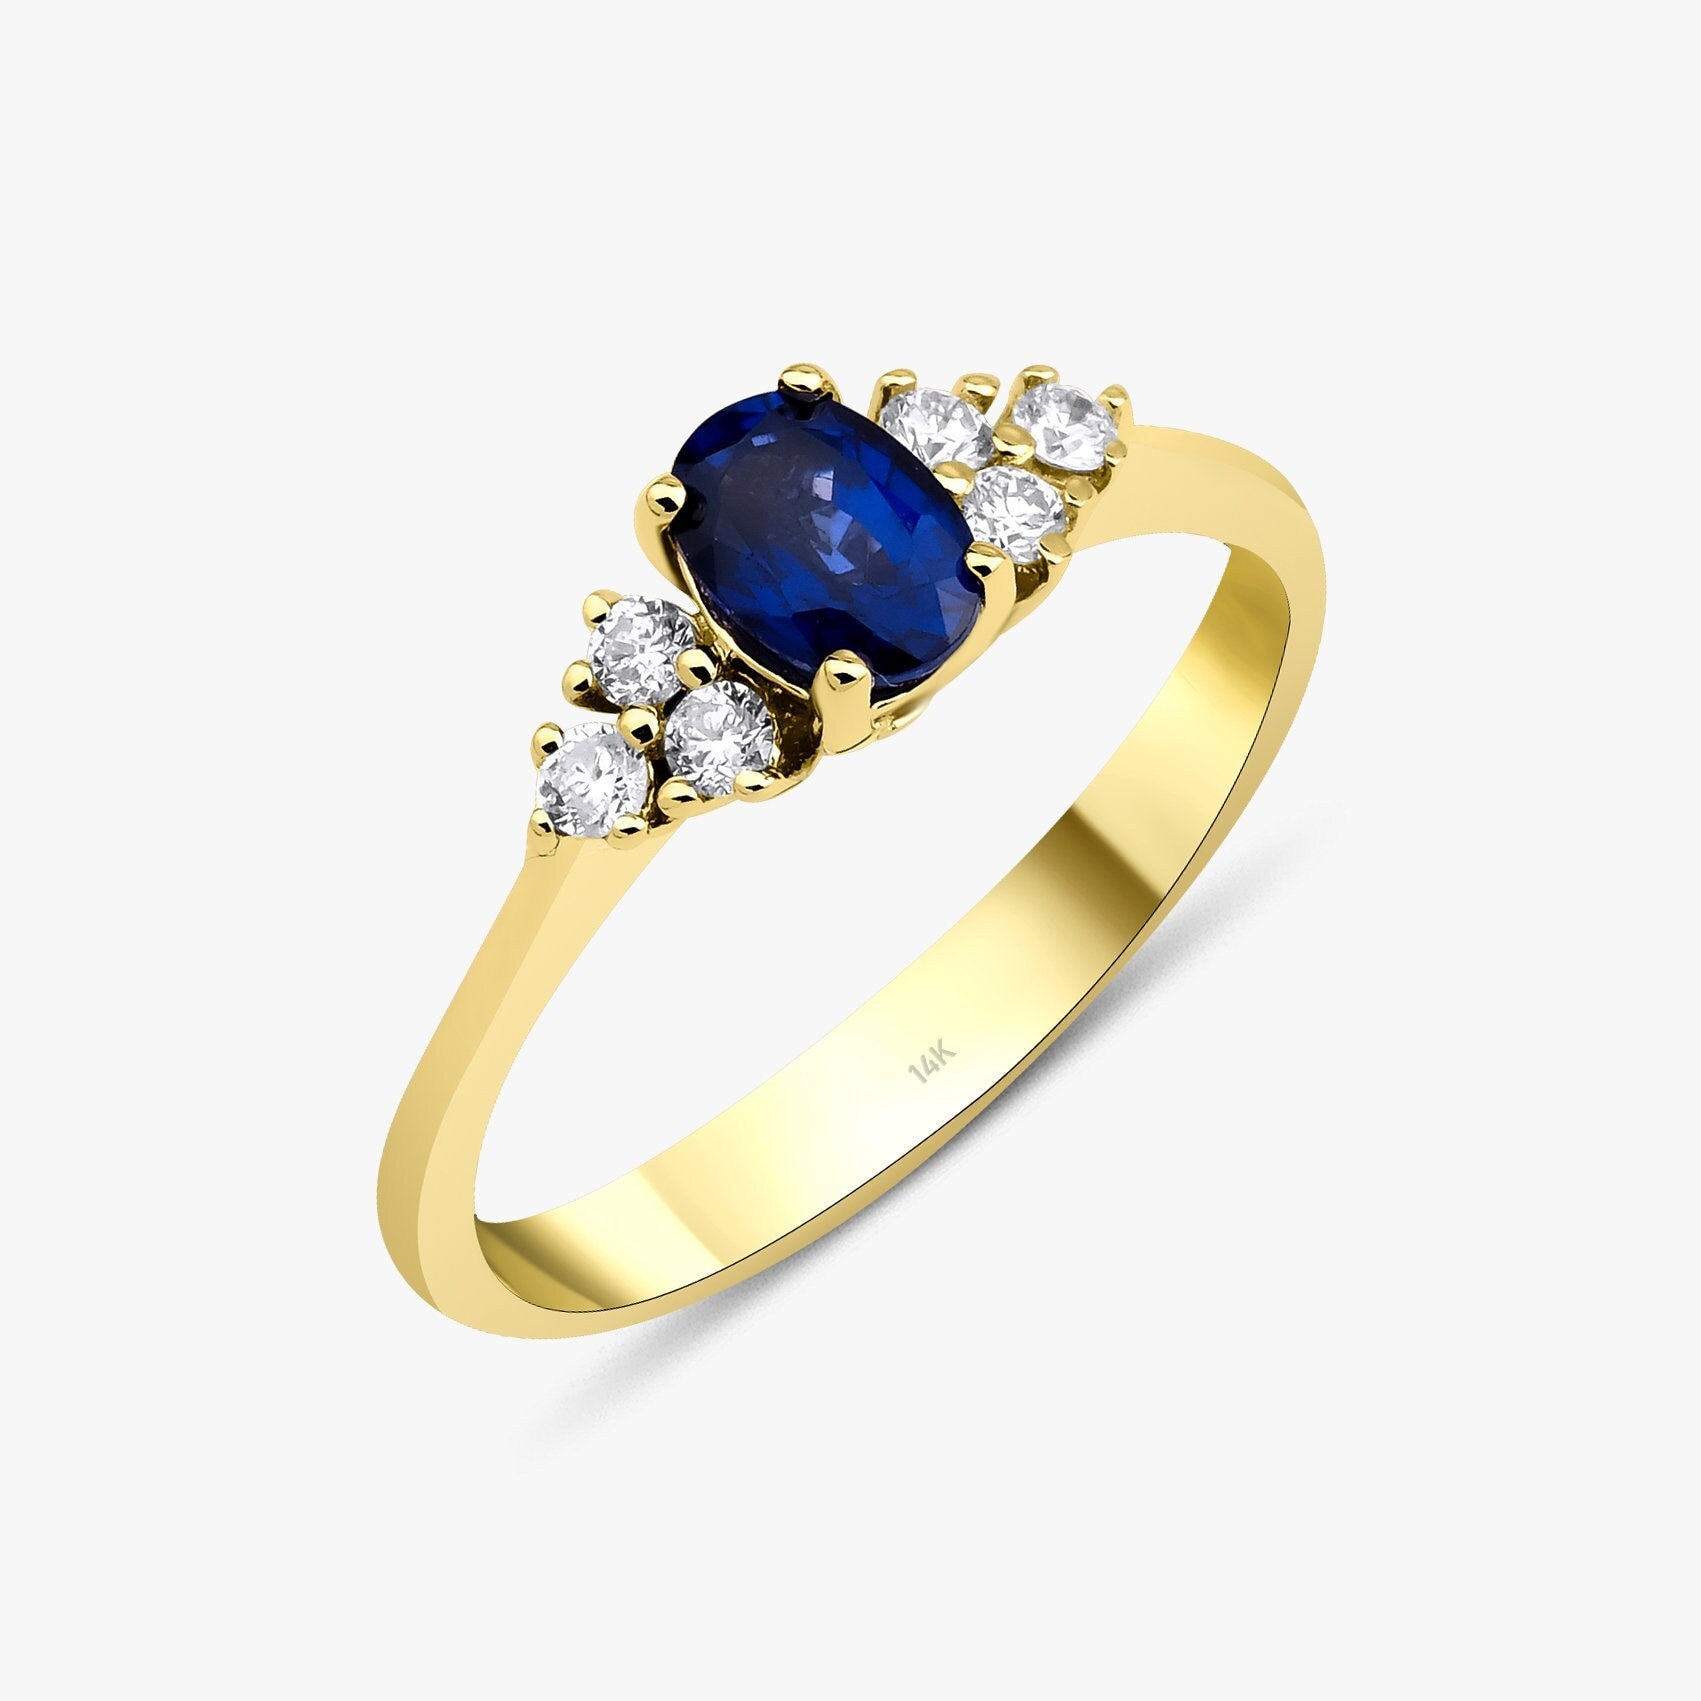 Oval Sapphire and Diamond Ring in 14K Gold